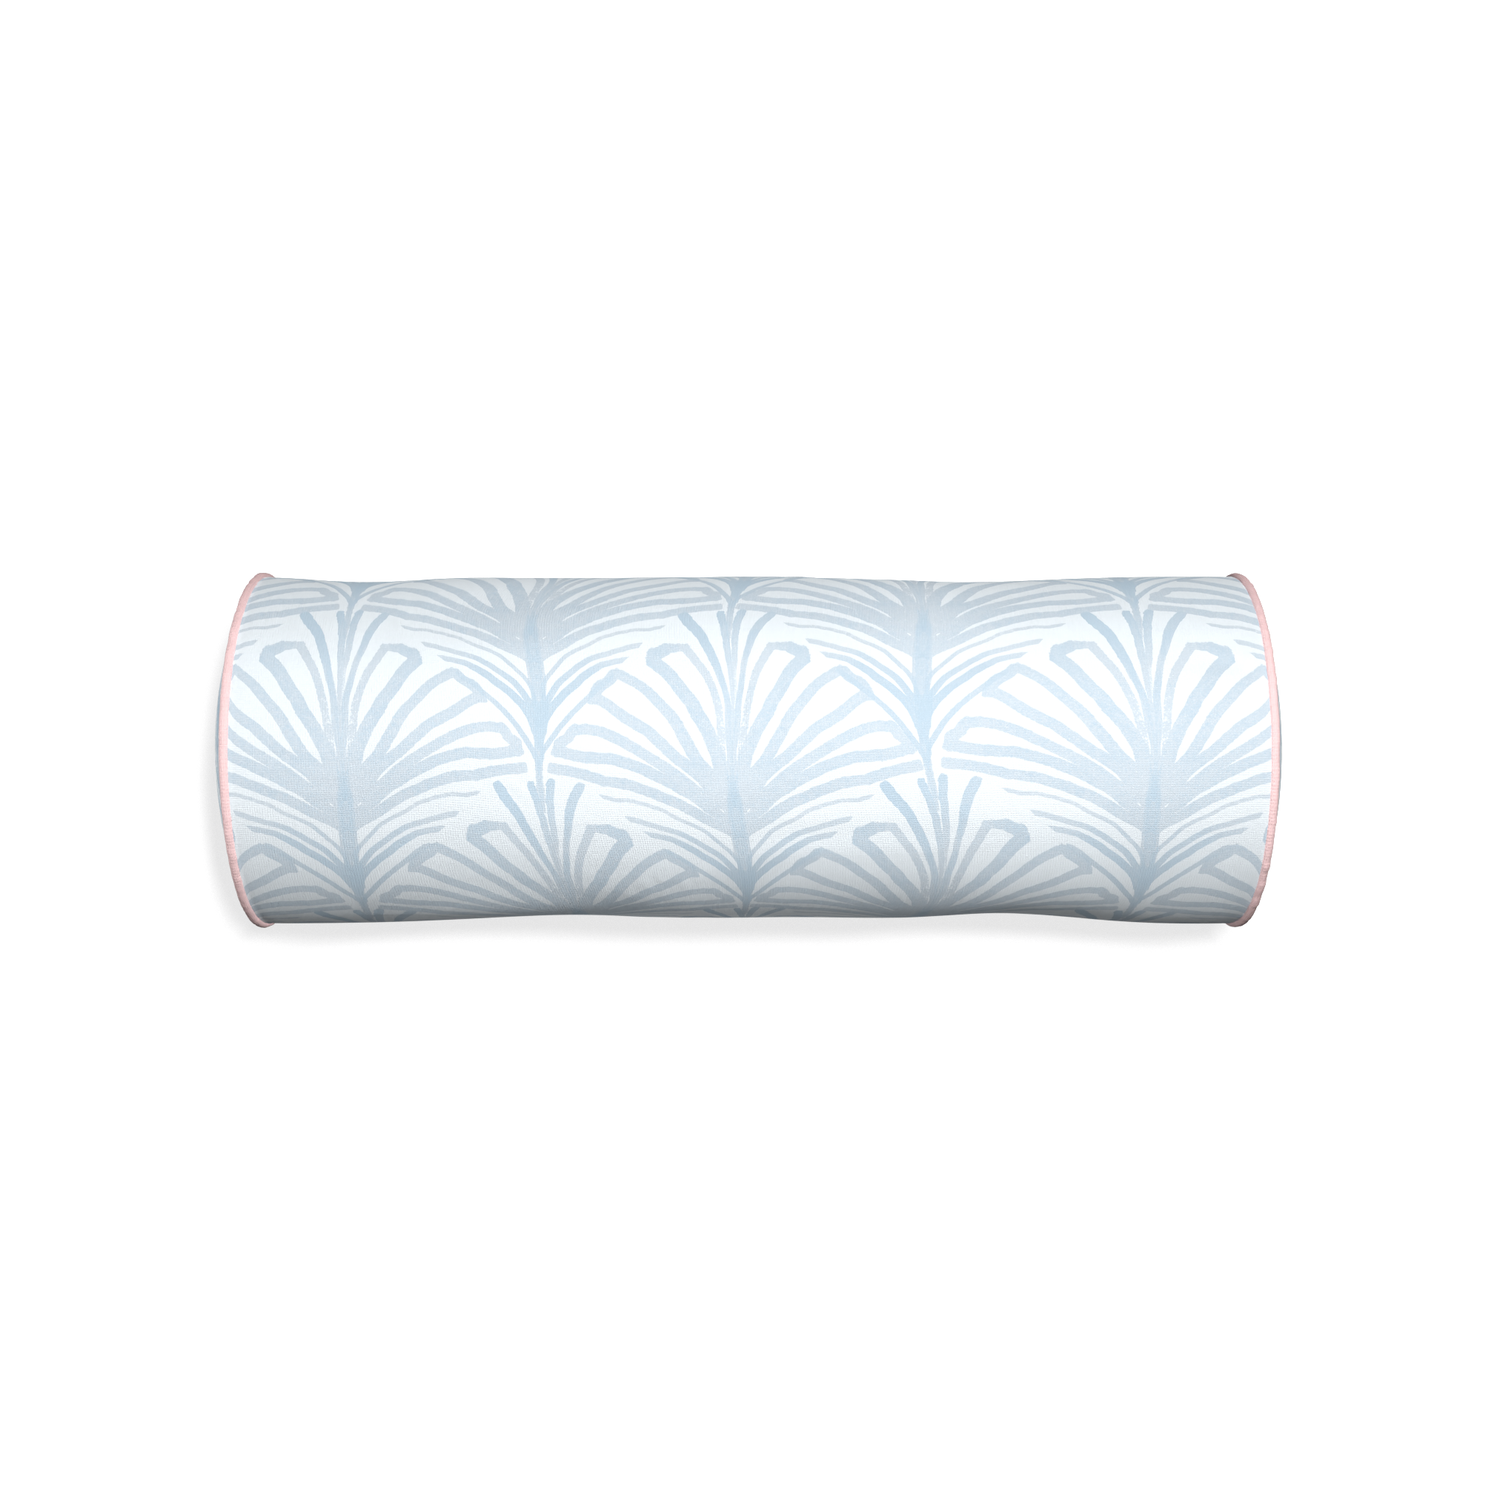 Bolster suzy sky custom sky blue palmpillow with petal piping on white background